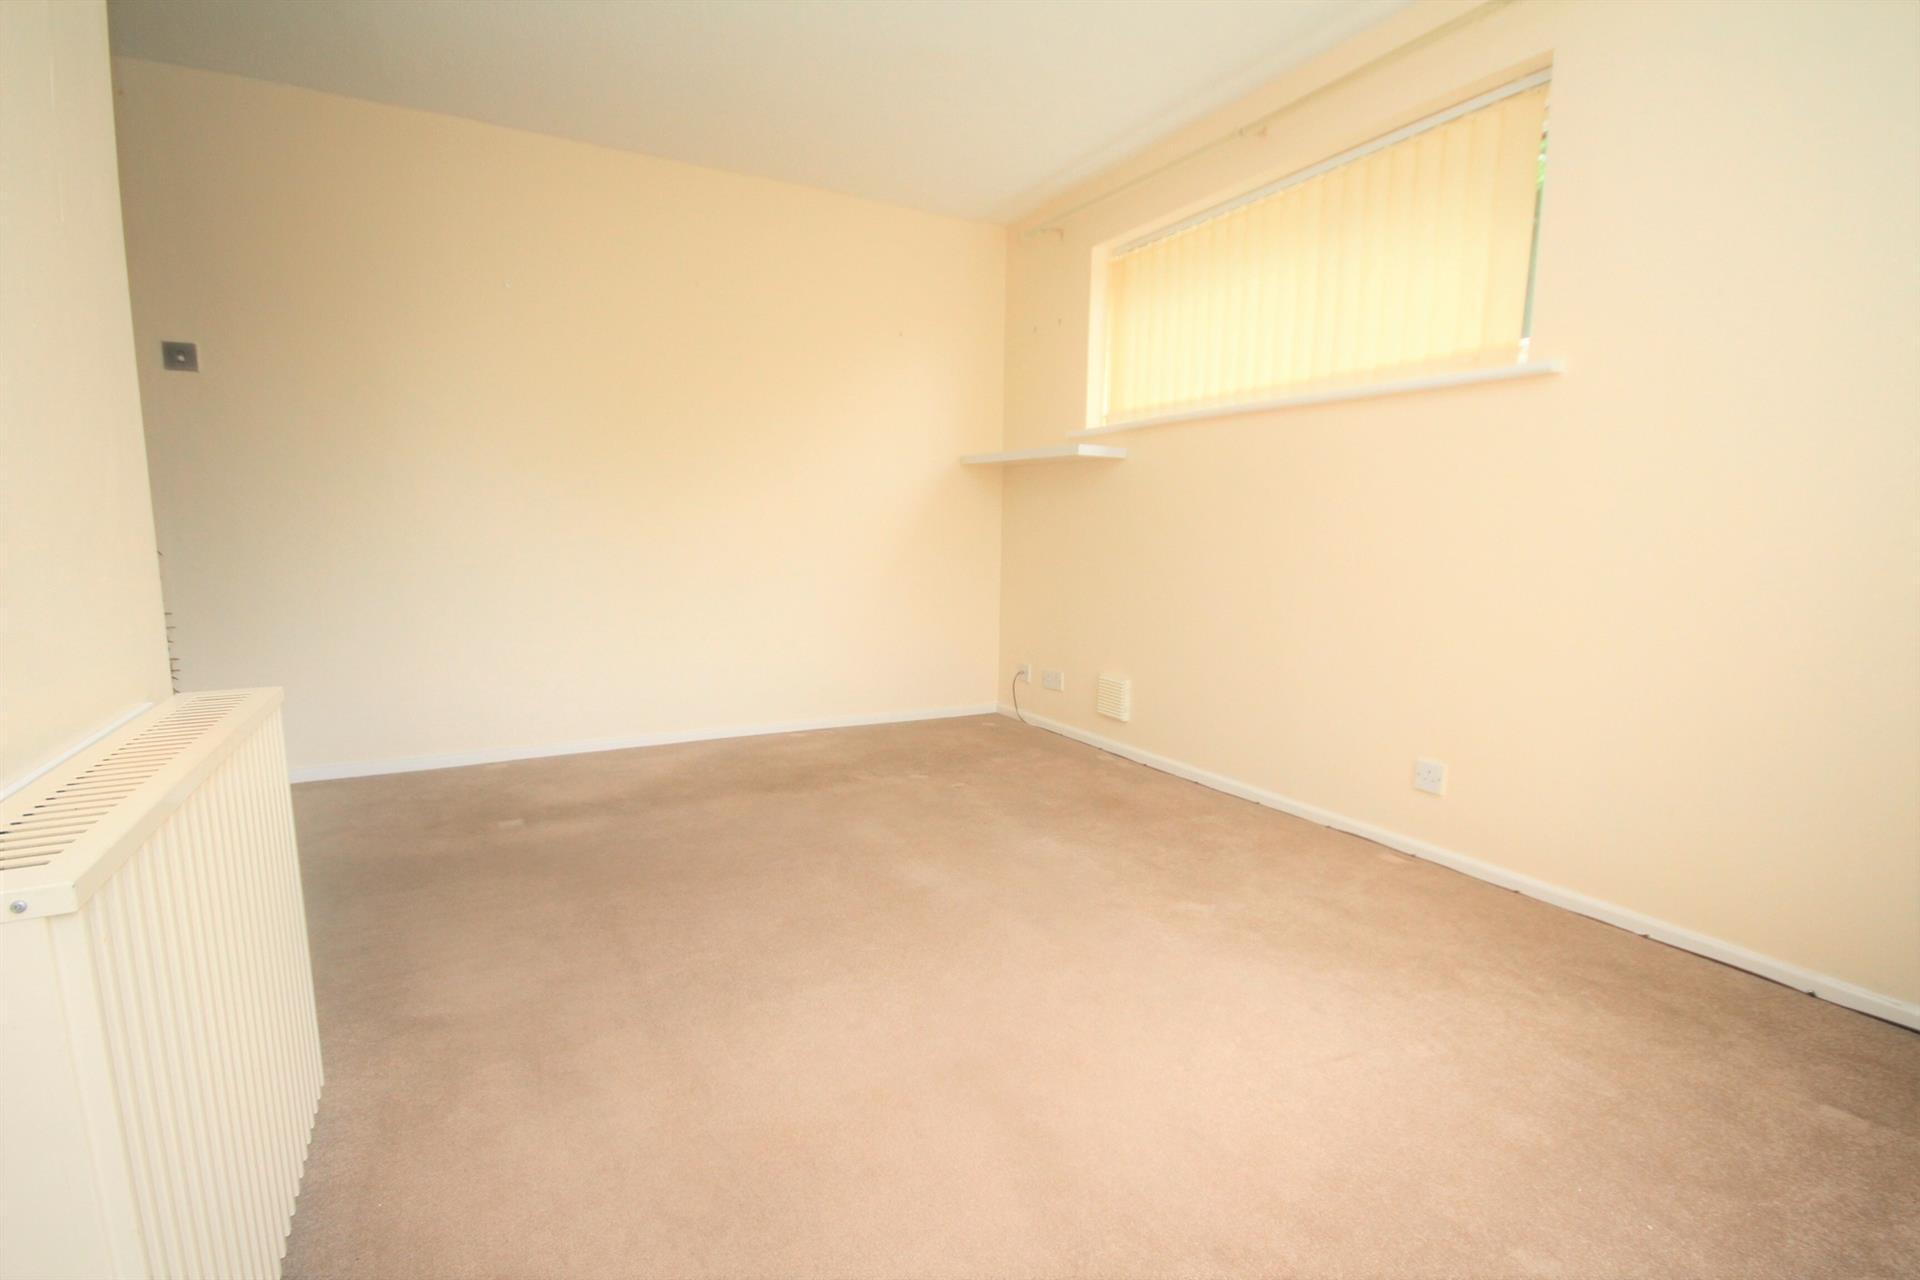 1 bedroom end terraced house Let Agreed in Bromley Cross, Bolton - Bedroom.